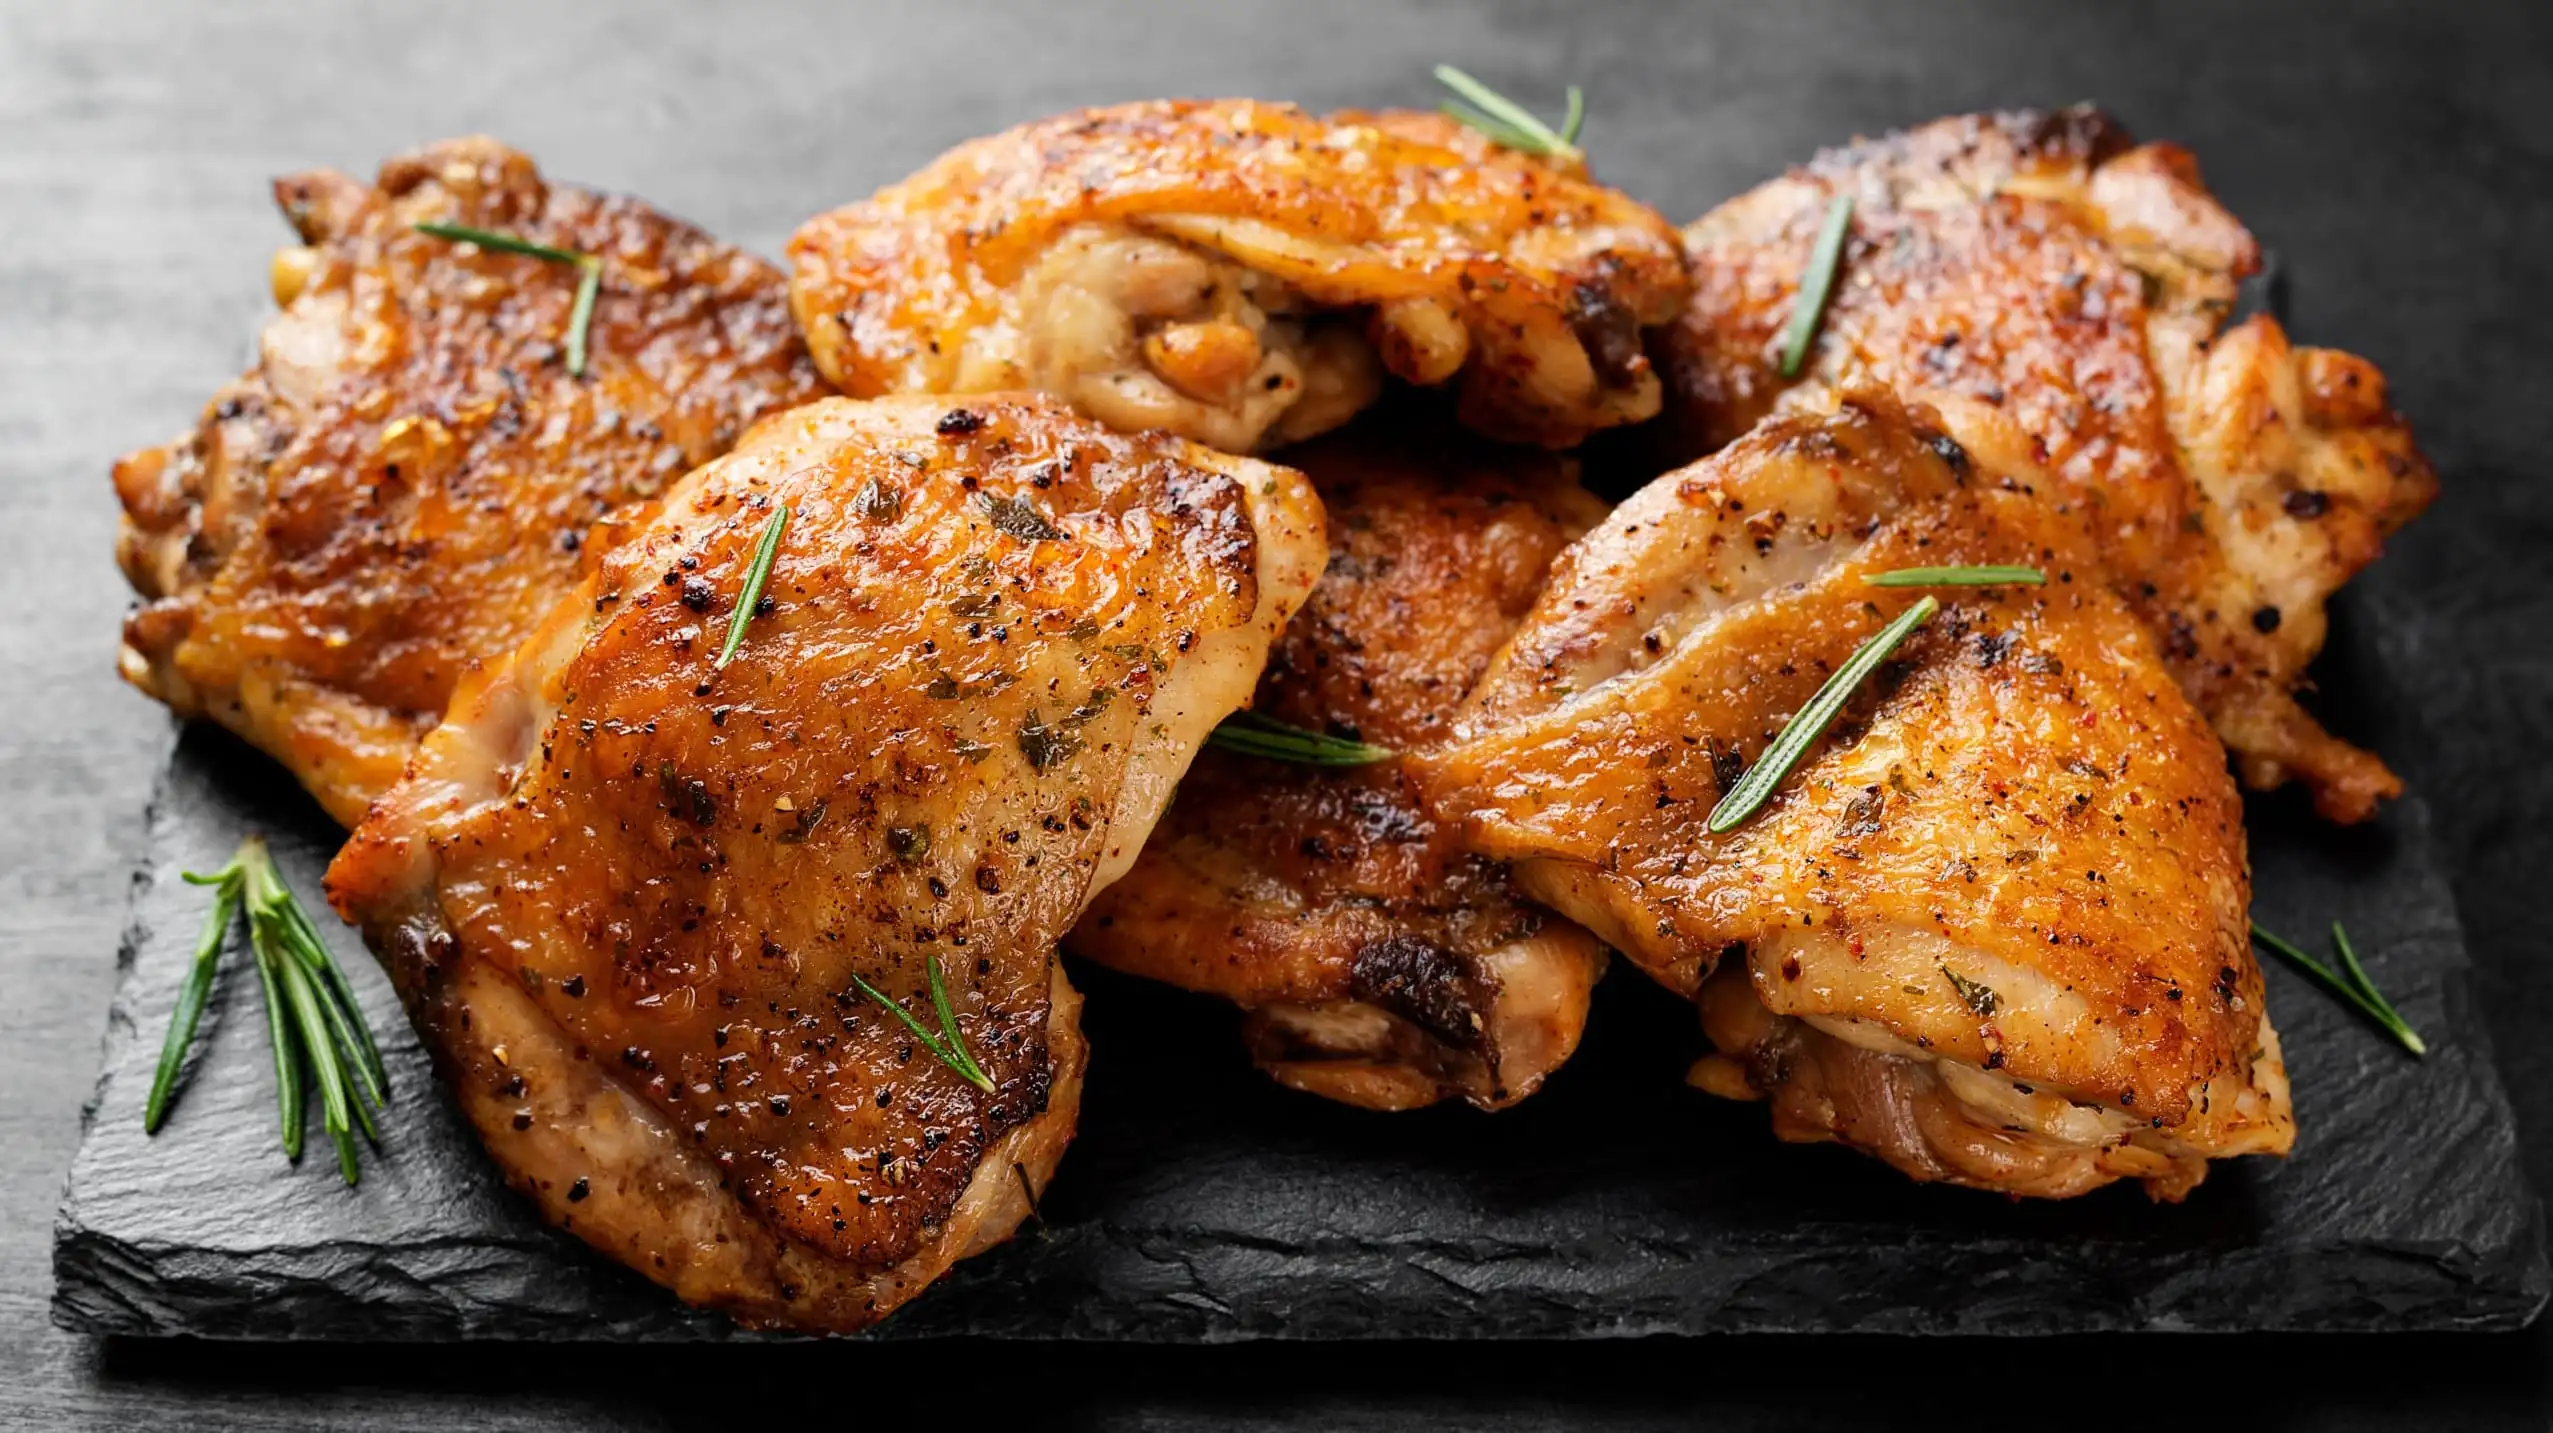 The definitive ranking of chicken pieces in order from best to worst